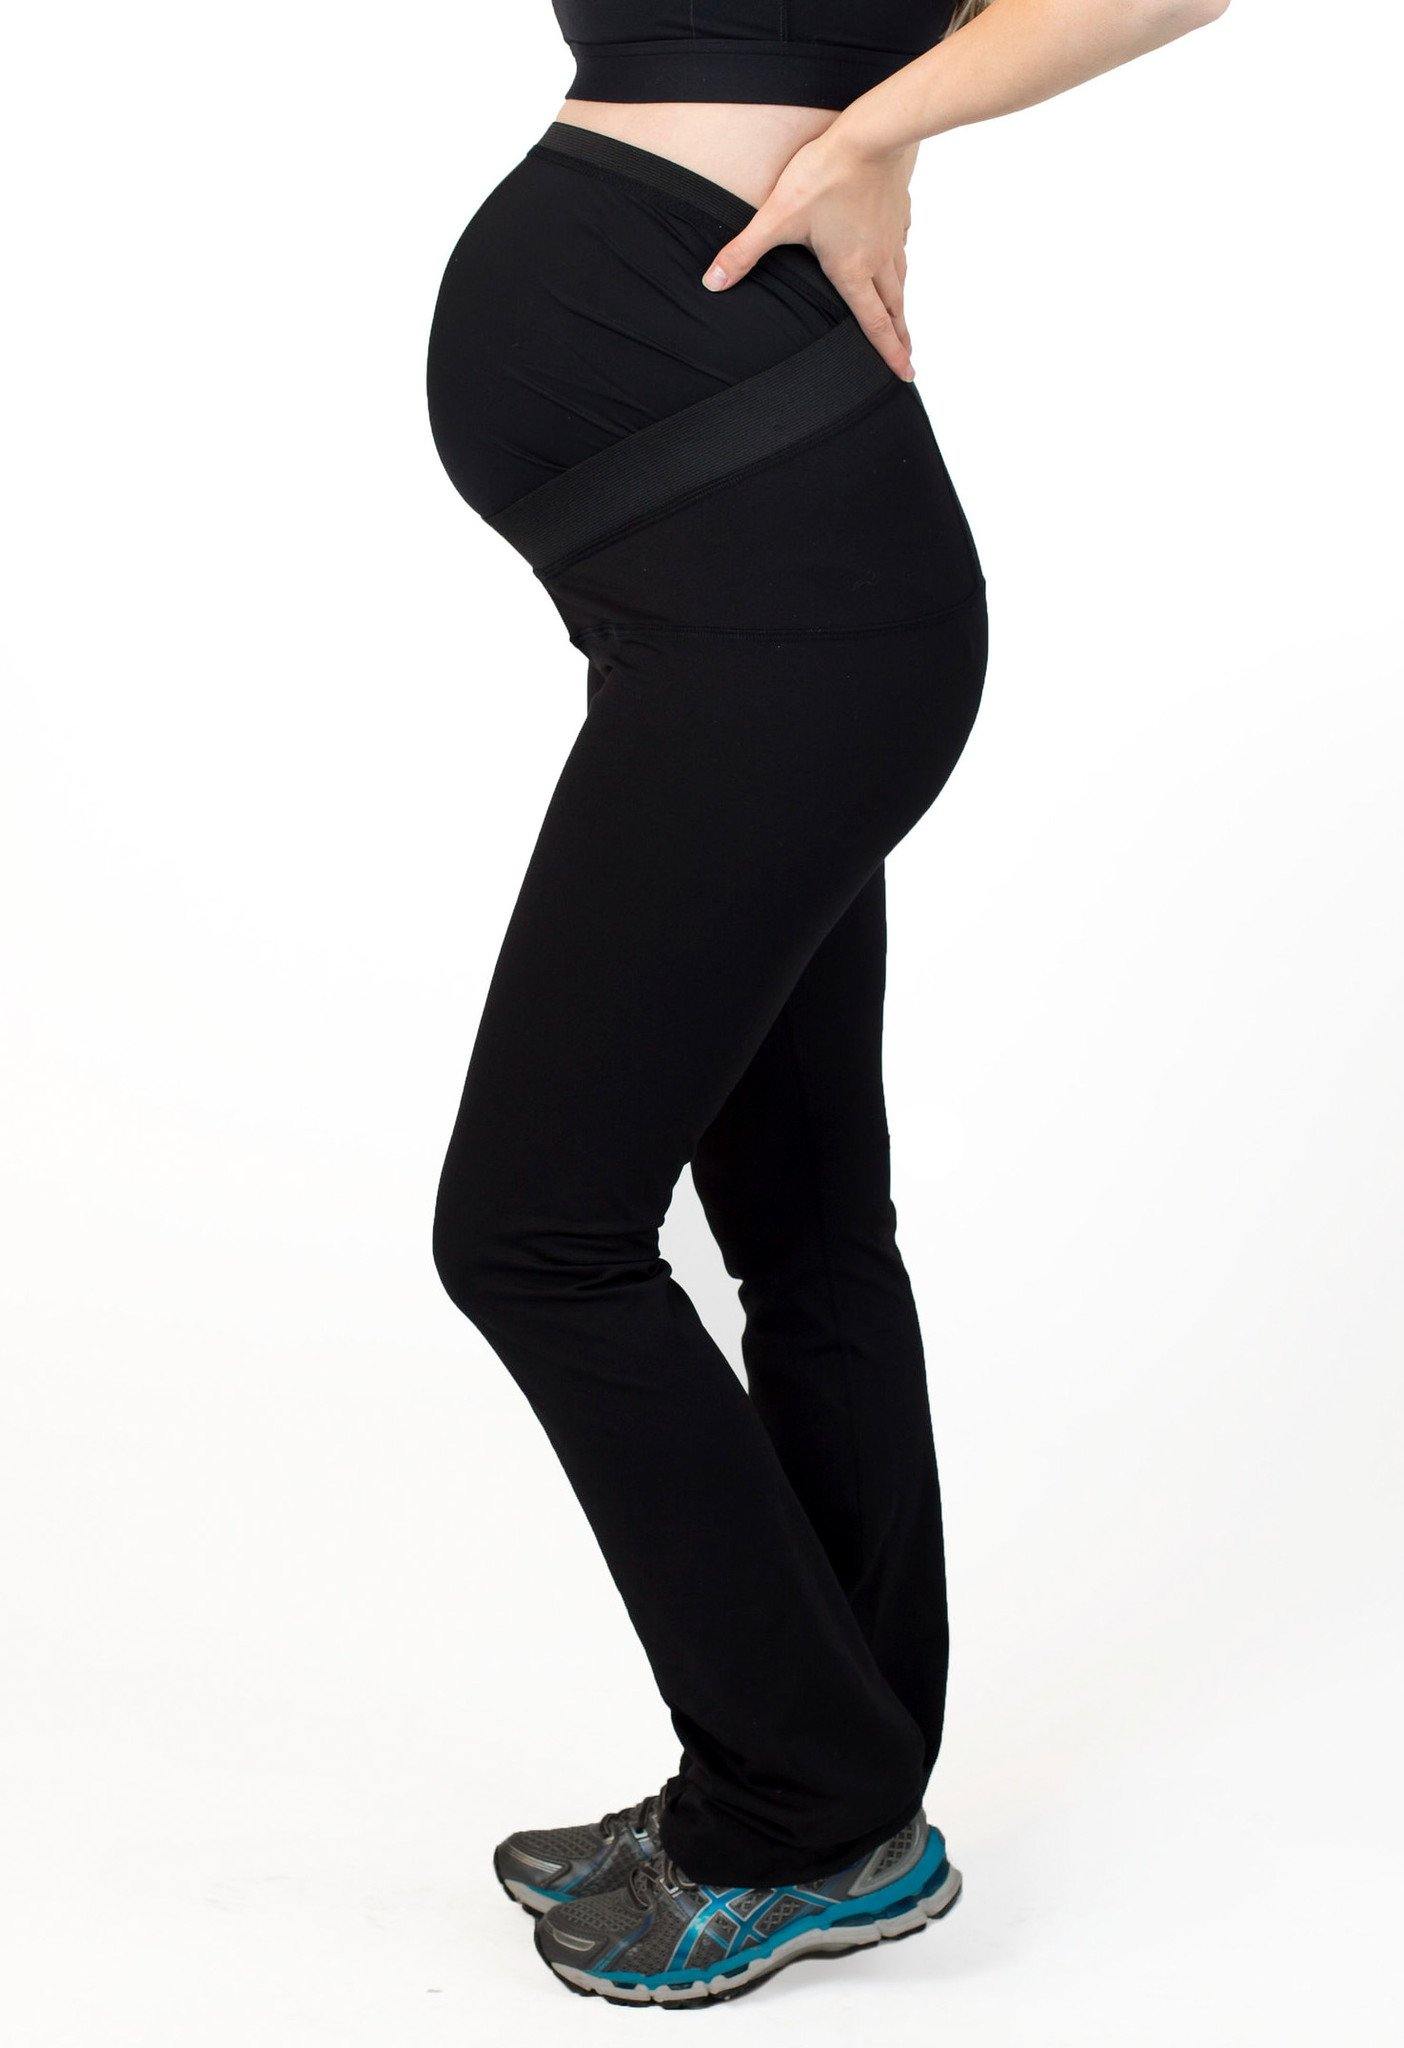 Women Maternity Workout Leggings Over The Belly Pregnancy